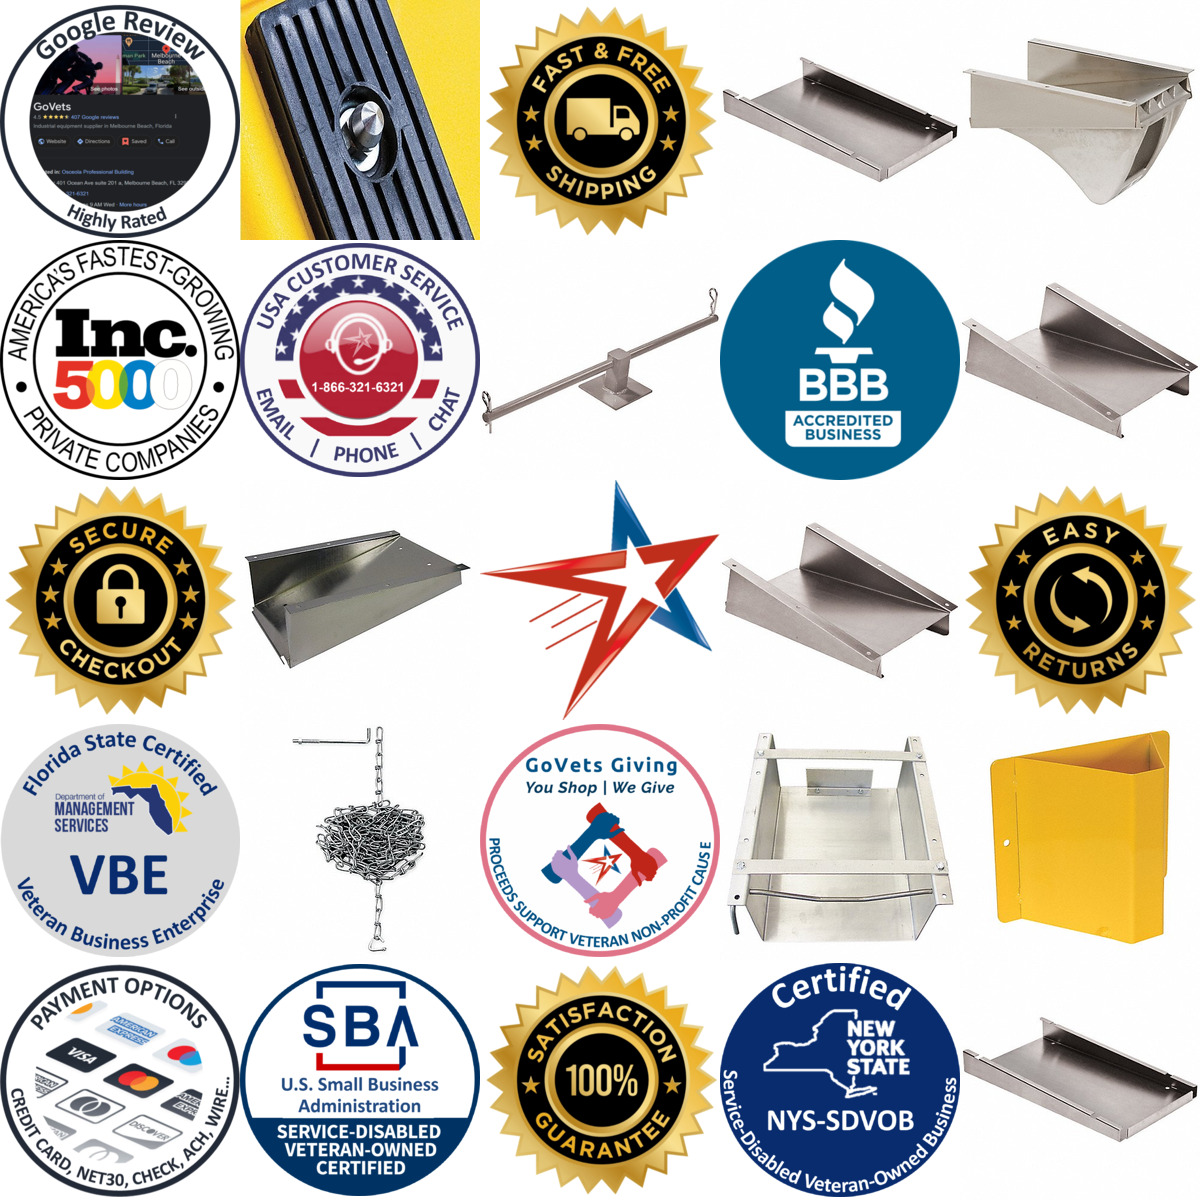 A selection of Wheel Chock Accessories products on GoVets